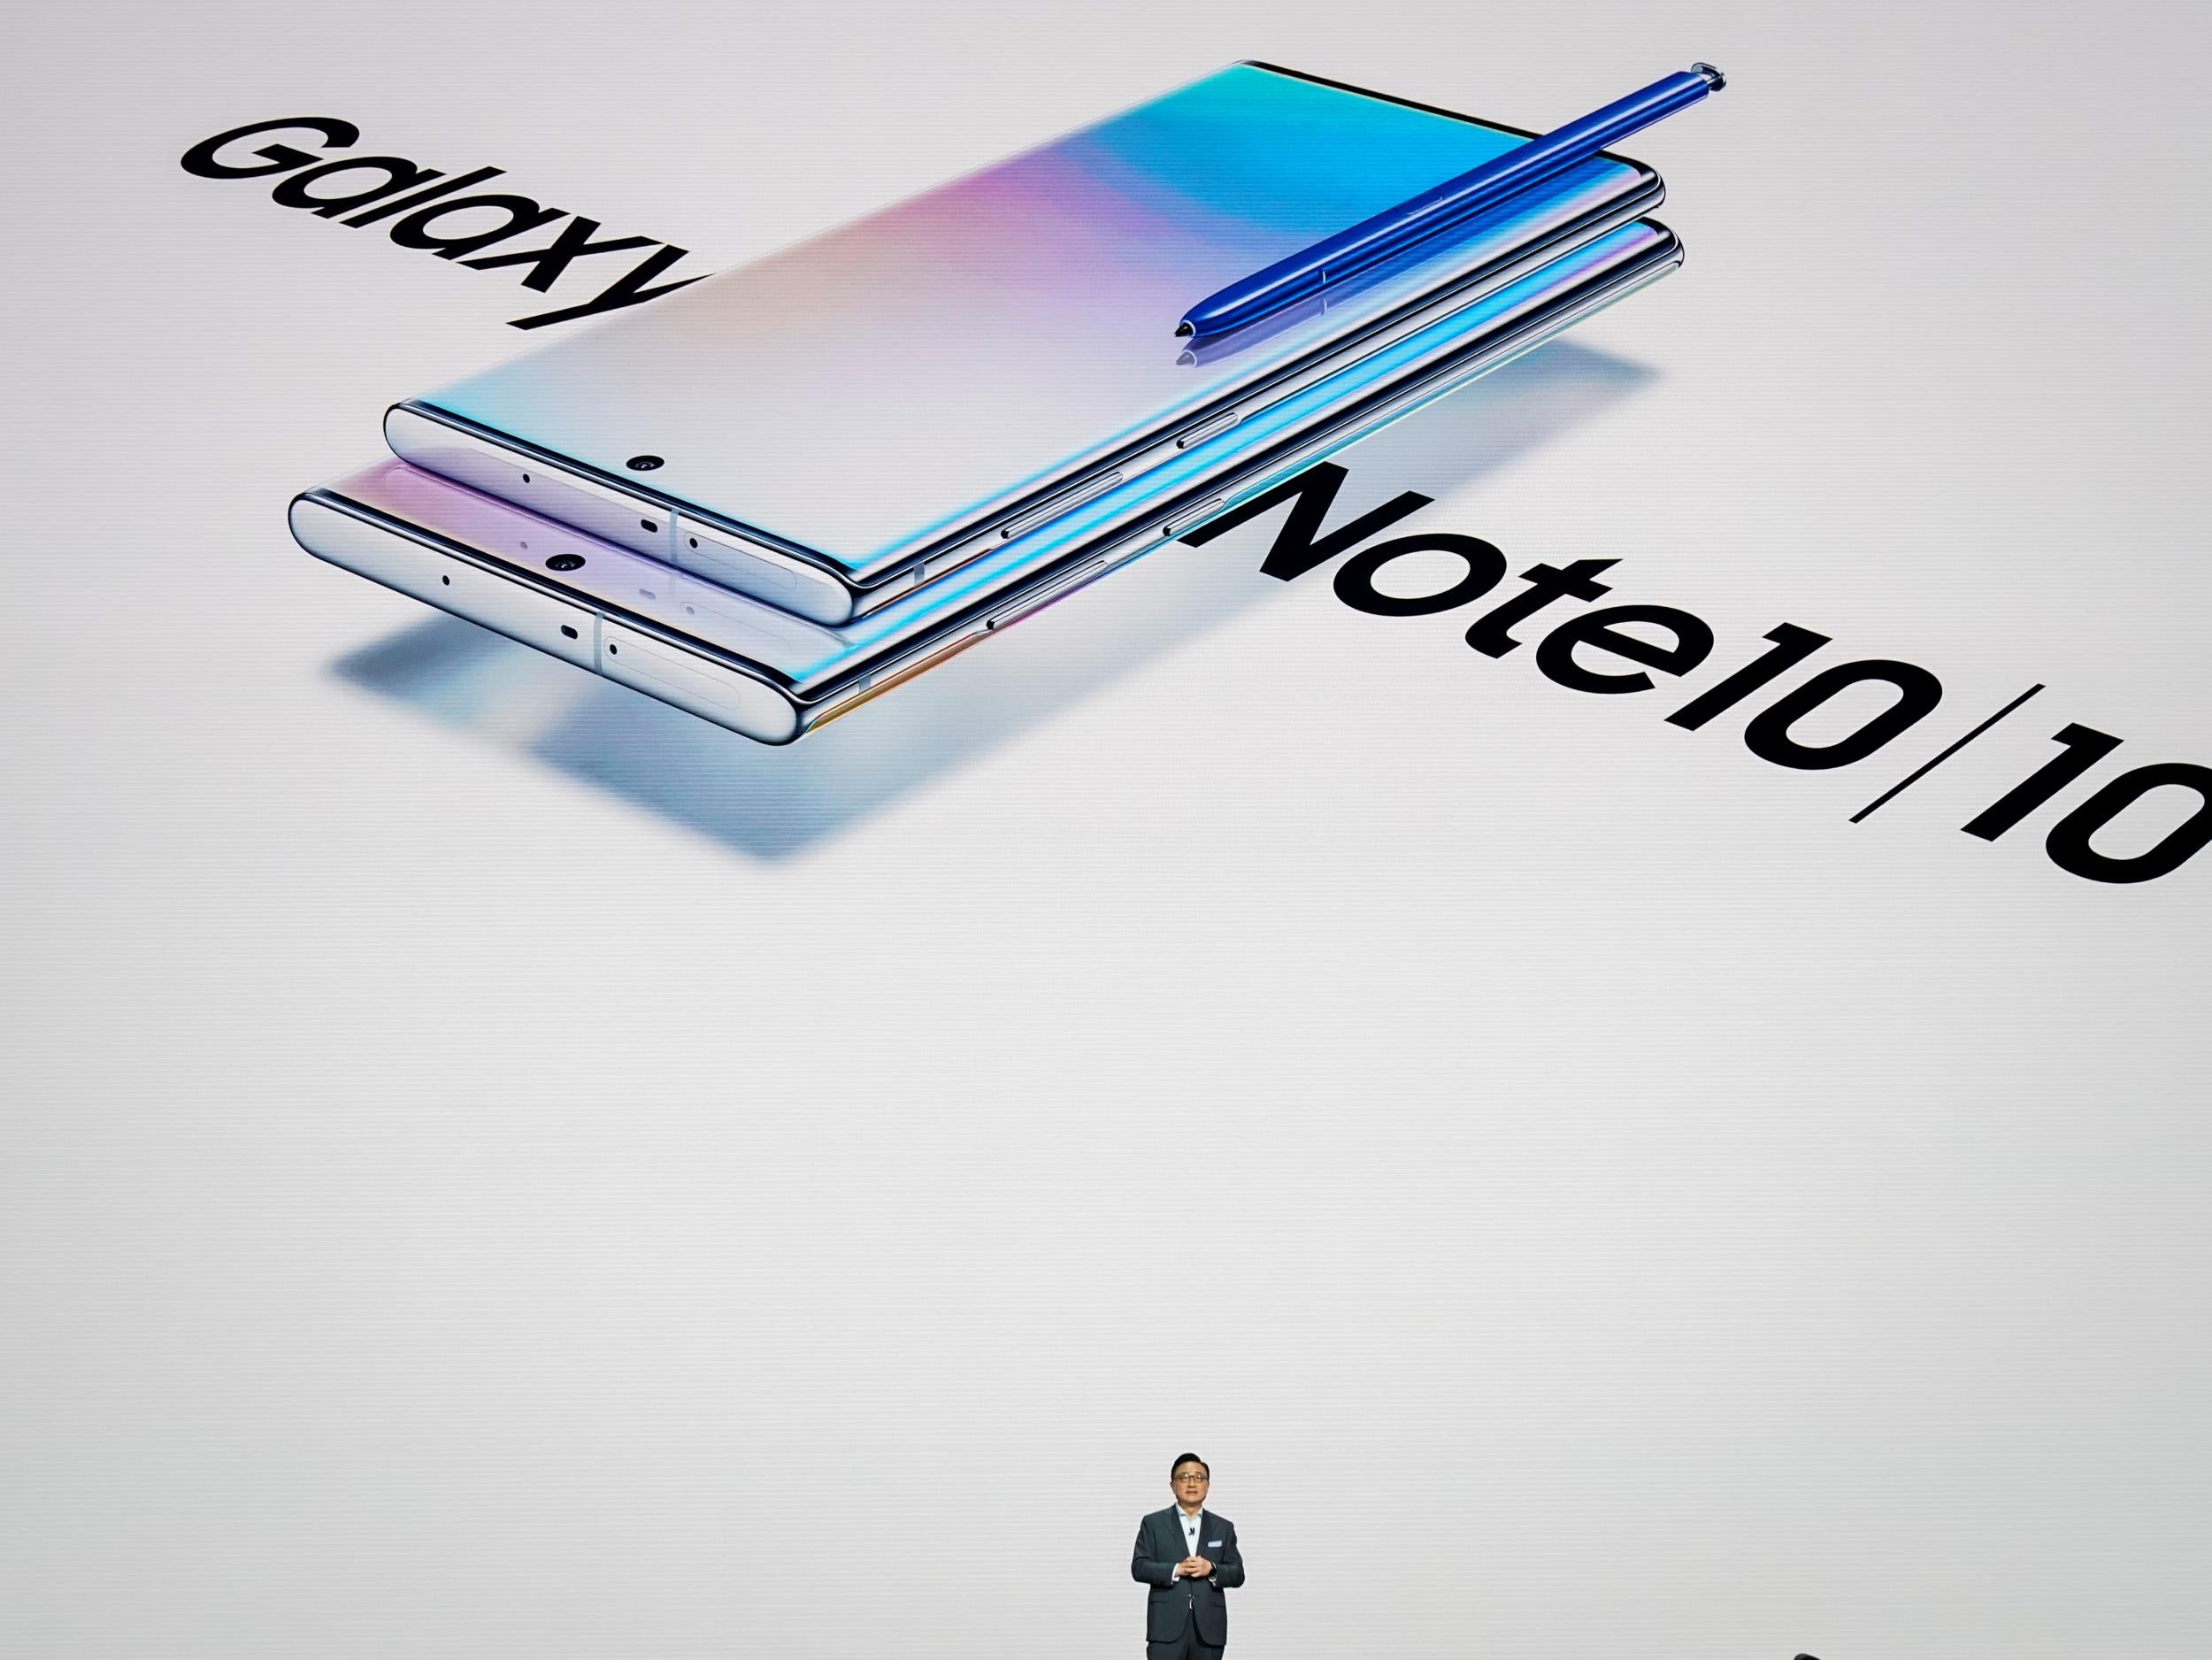 DJ Koh, president and CEO of Samsung Electronics, presents the Galaxy Note 10 smartphone during a launch event at Barclays Center on 7 August, 2019 in New York